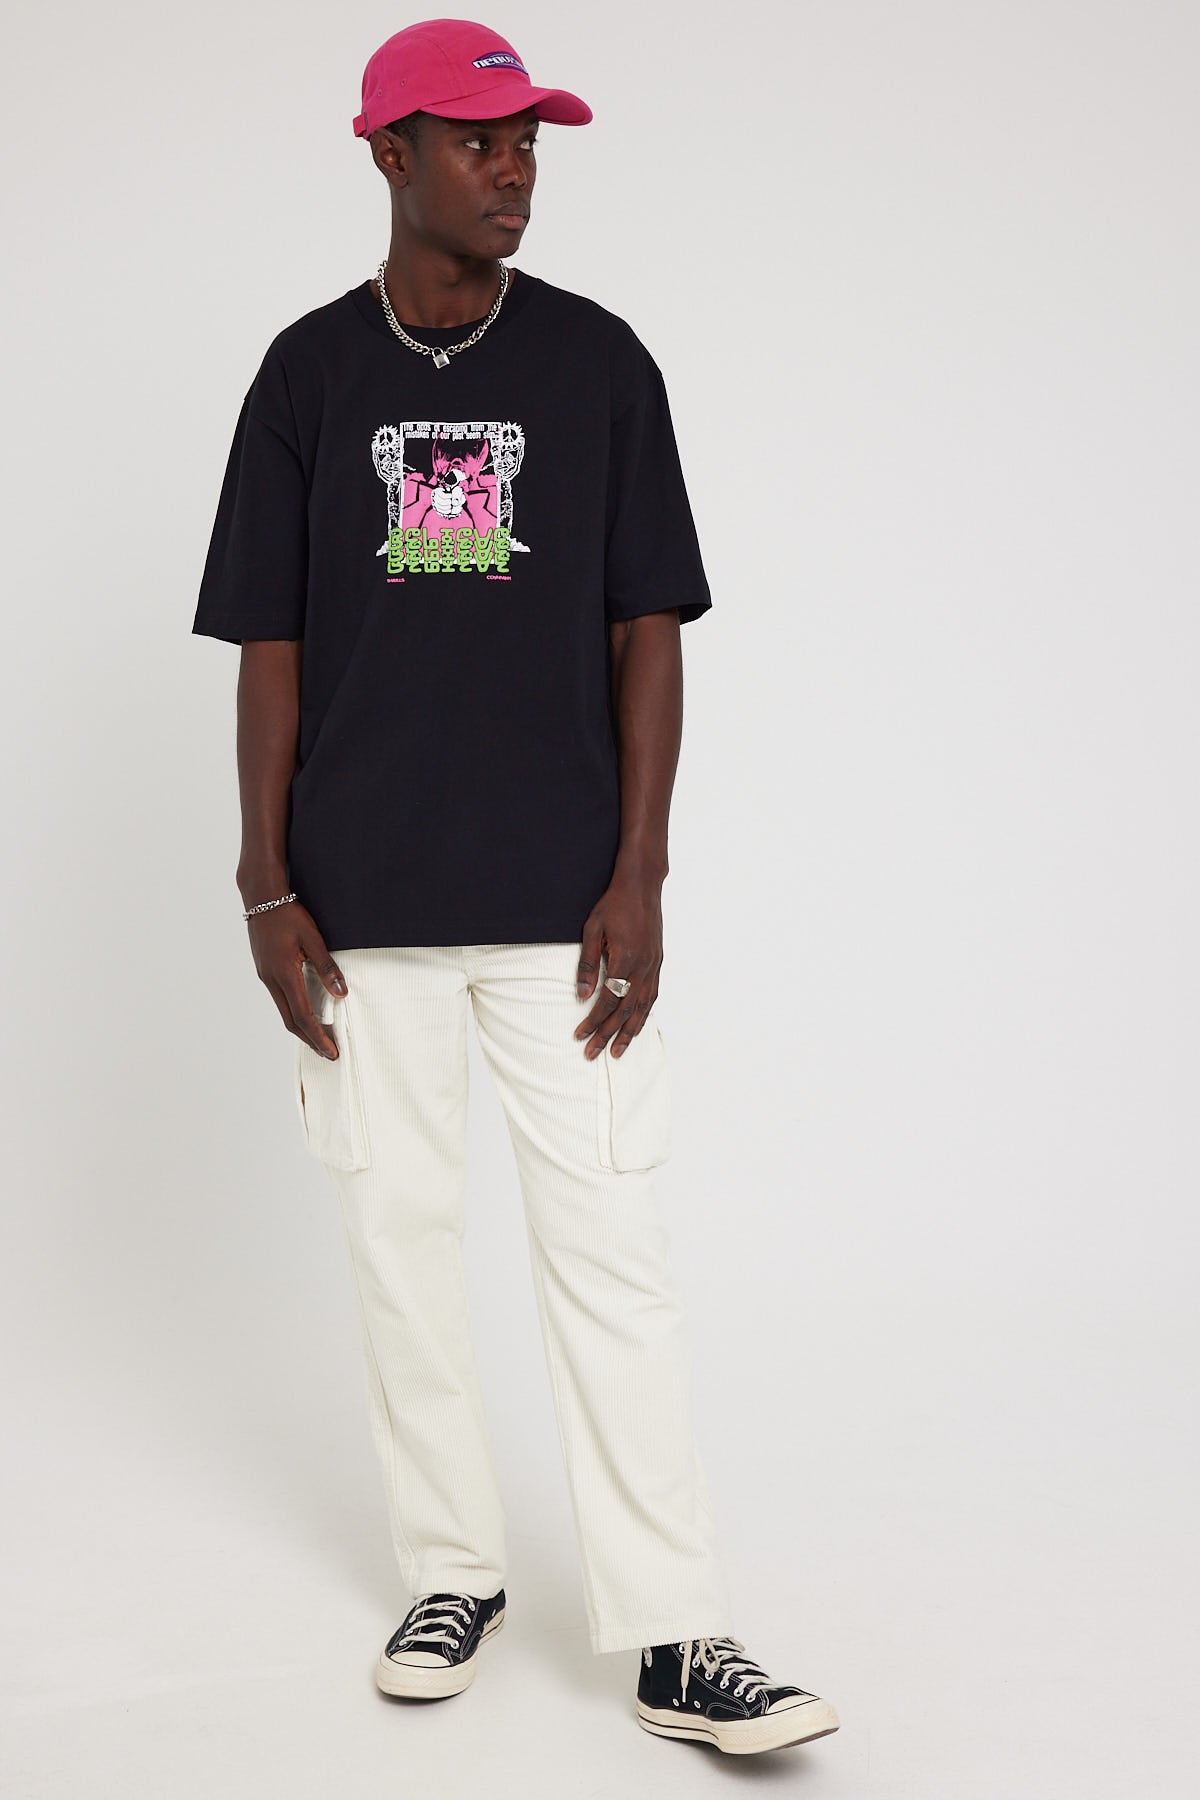 Thrills Escape the Past Oversized Fit Tee Black